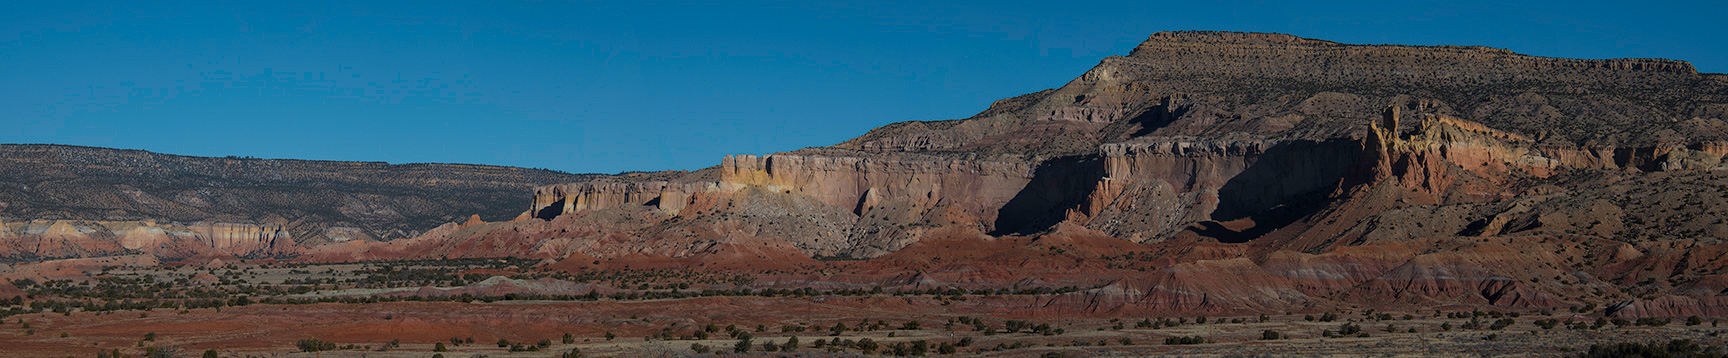 Panoramic view, looking towards the red rock formations at Ghost Ranch.